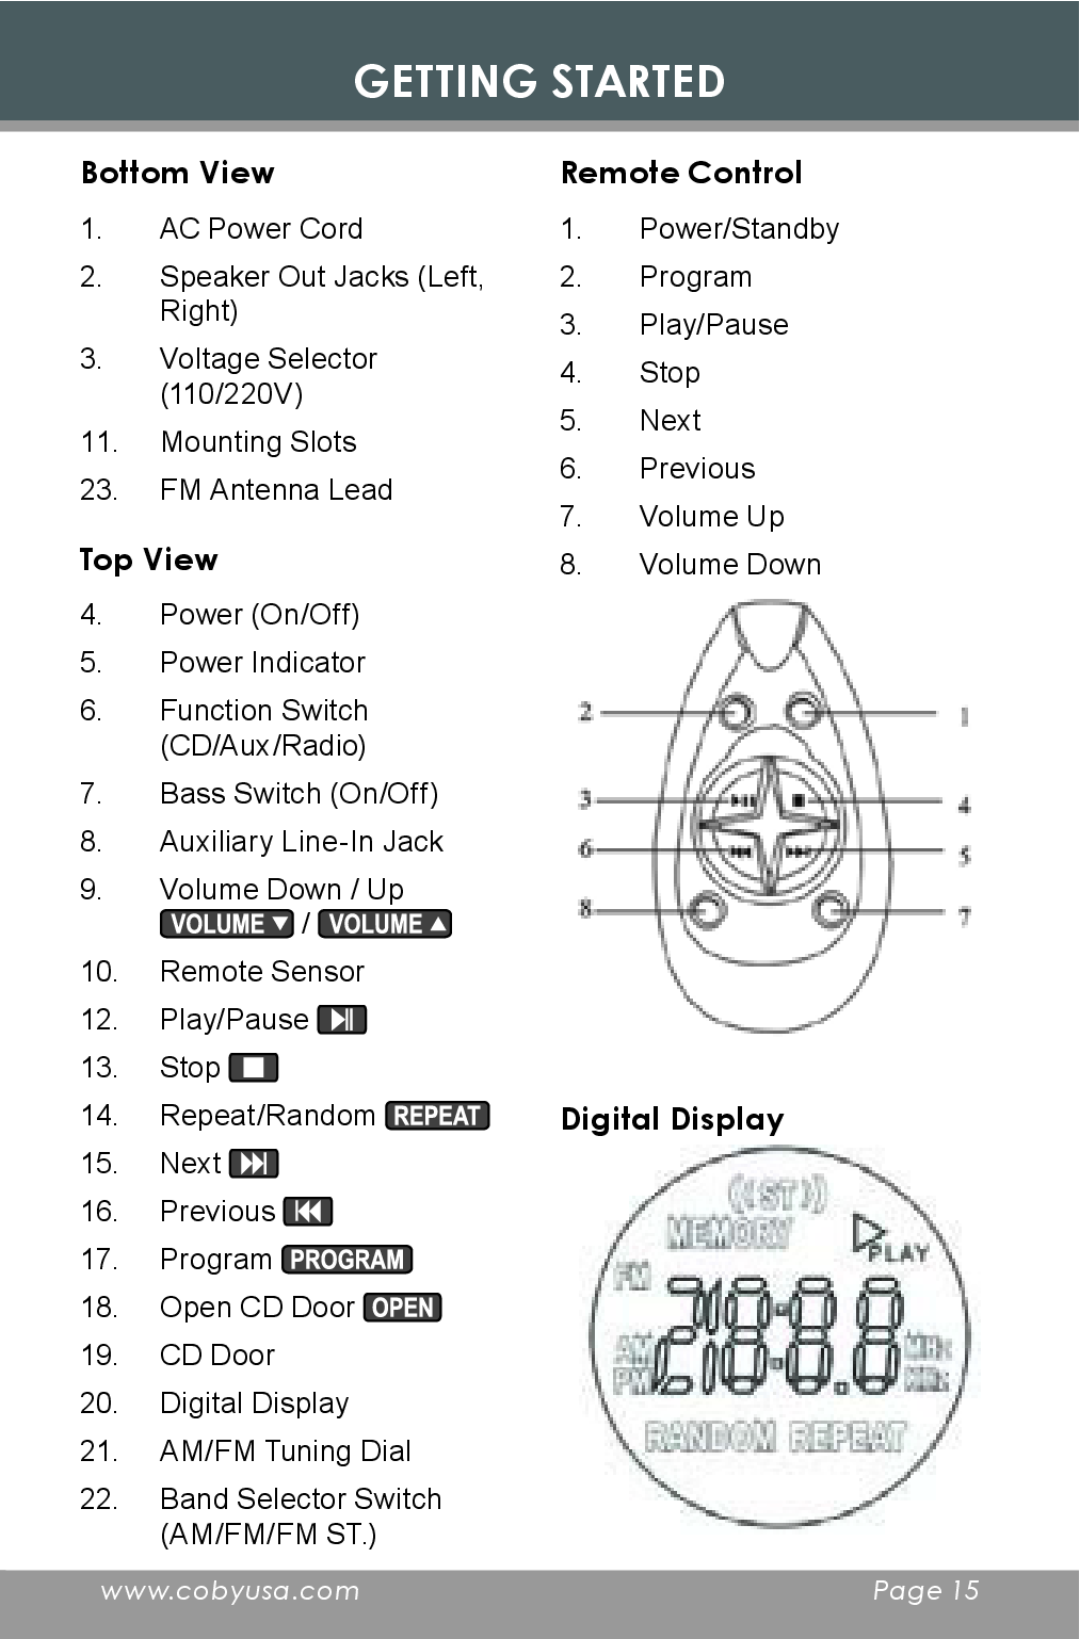 COBY electronic CD377 instruction manual Bottom View, Top View, Remote Control, Digital Display, Getting Started 